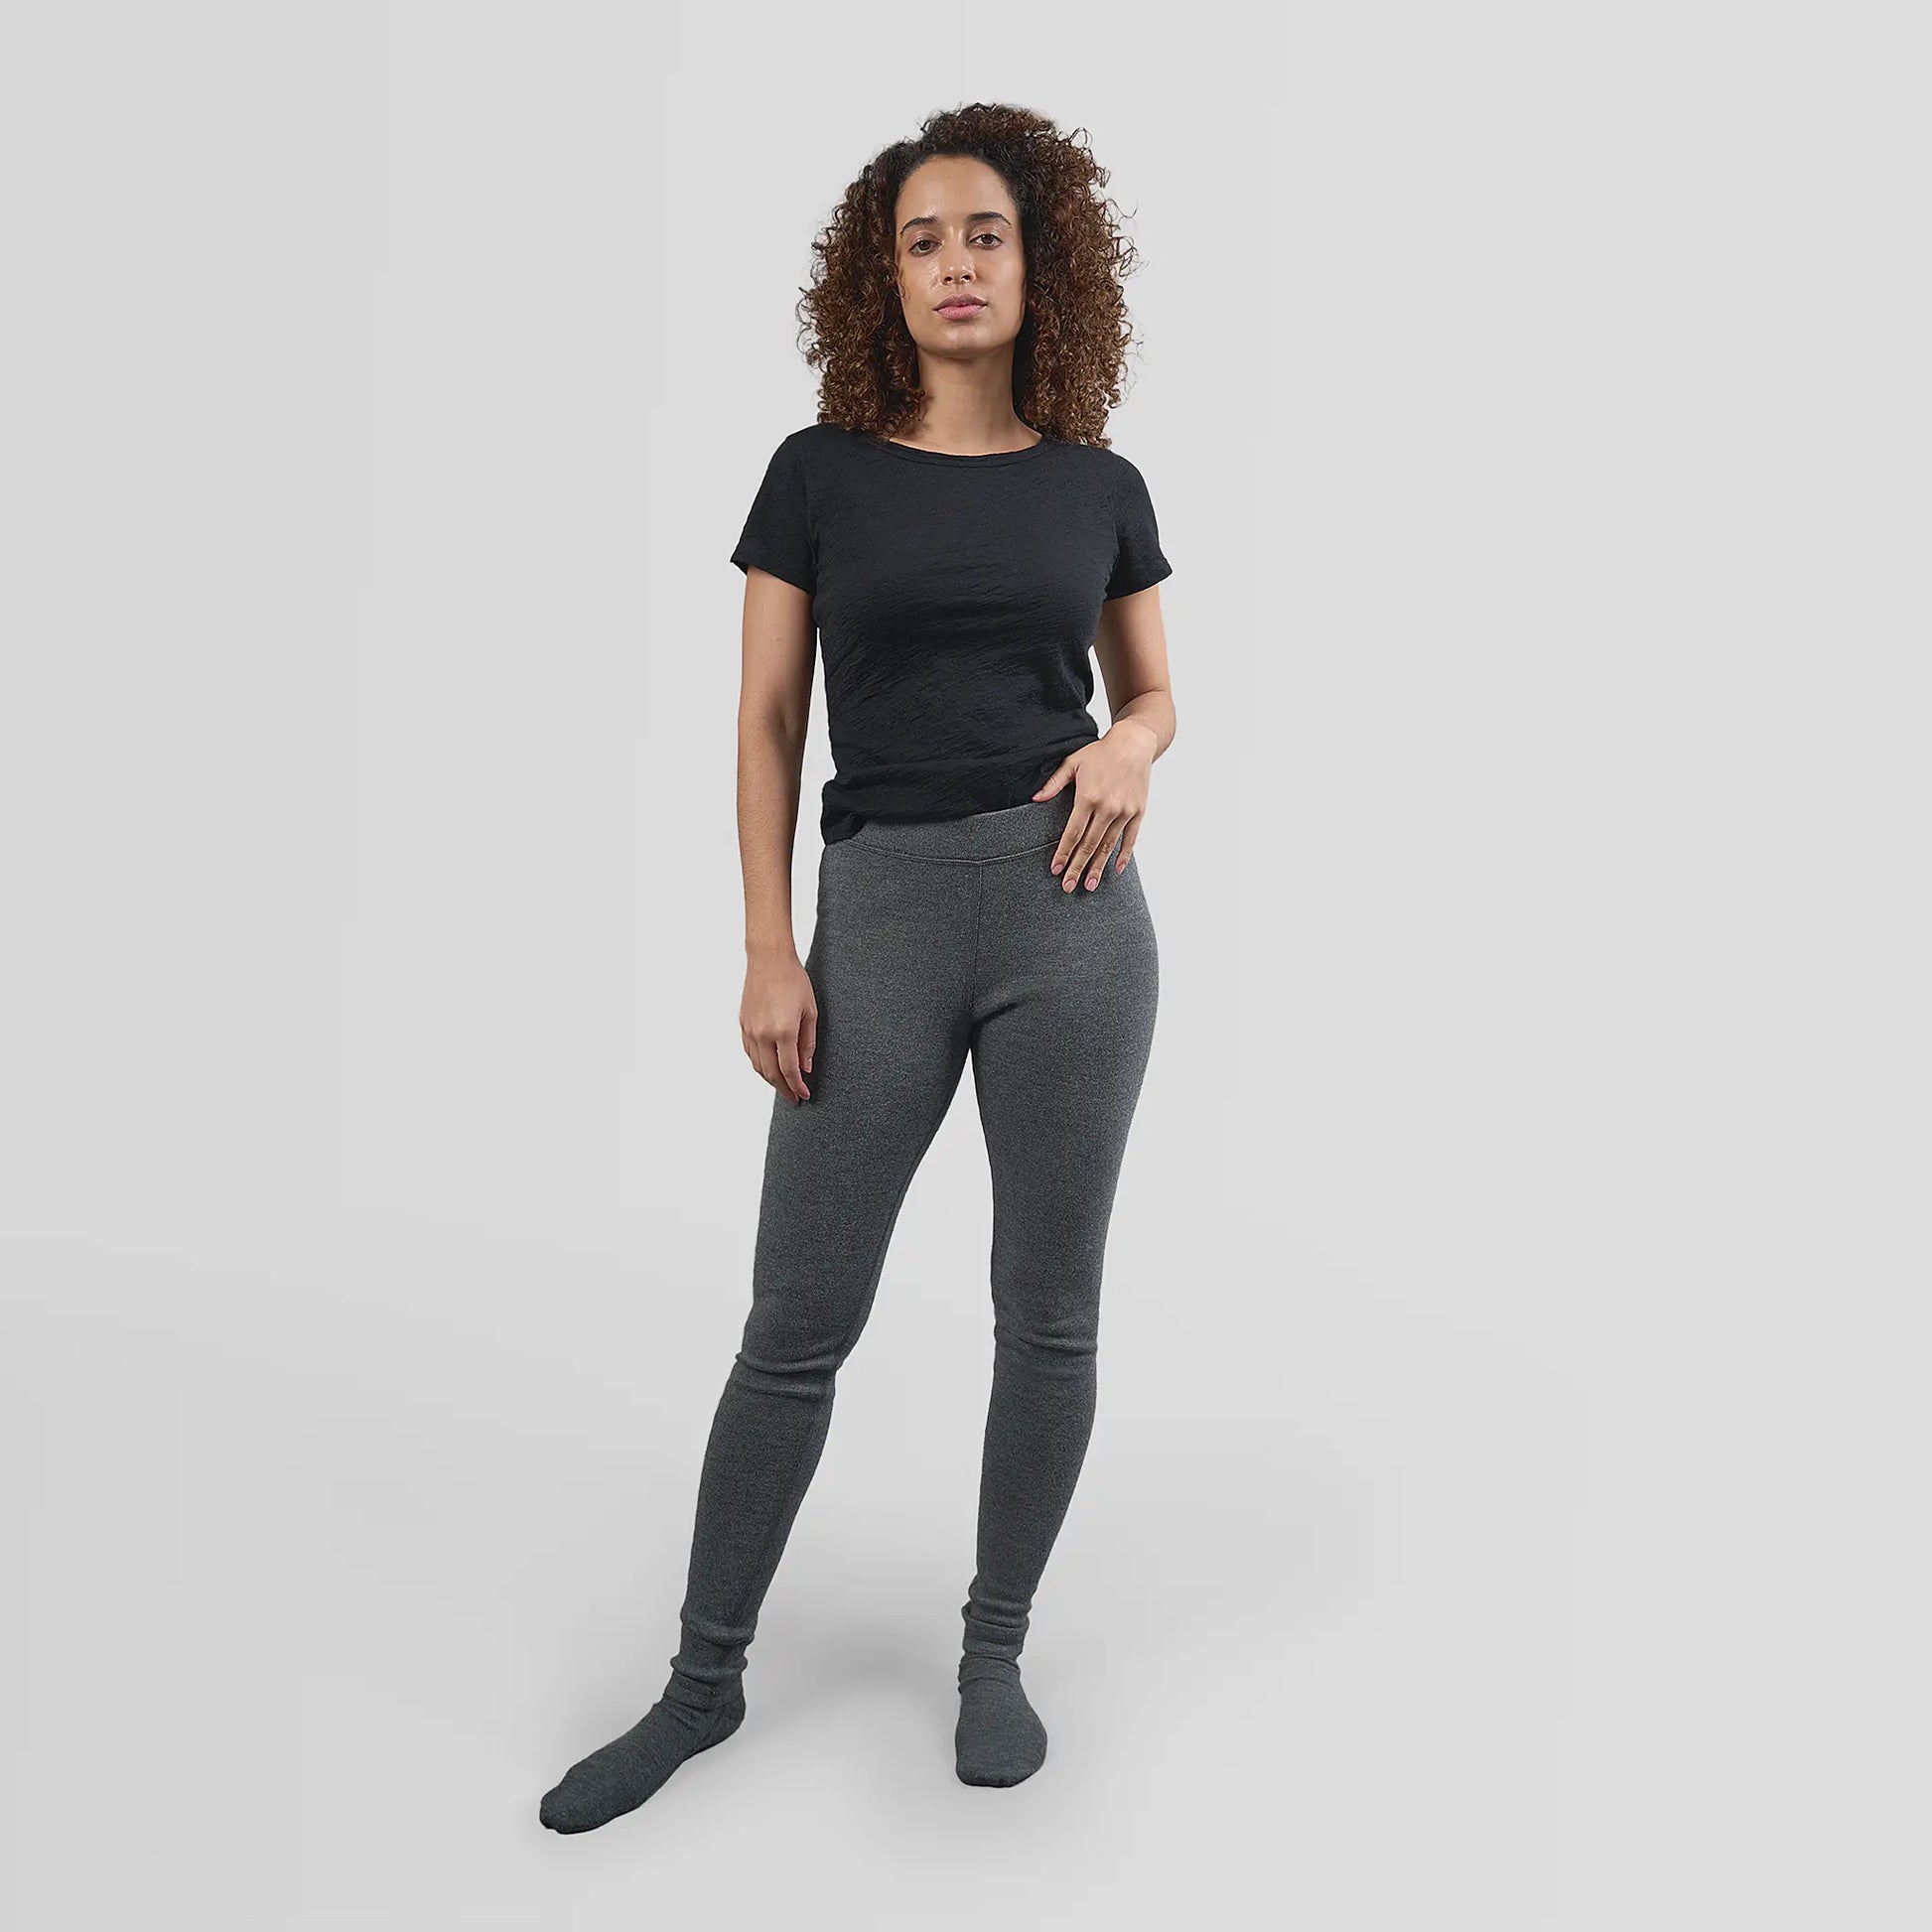 Women's Alpaca Wool Leggings: 420 Midweight I Arms of Andes